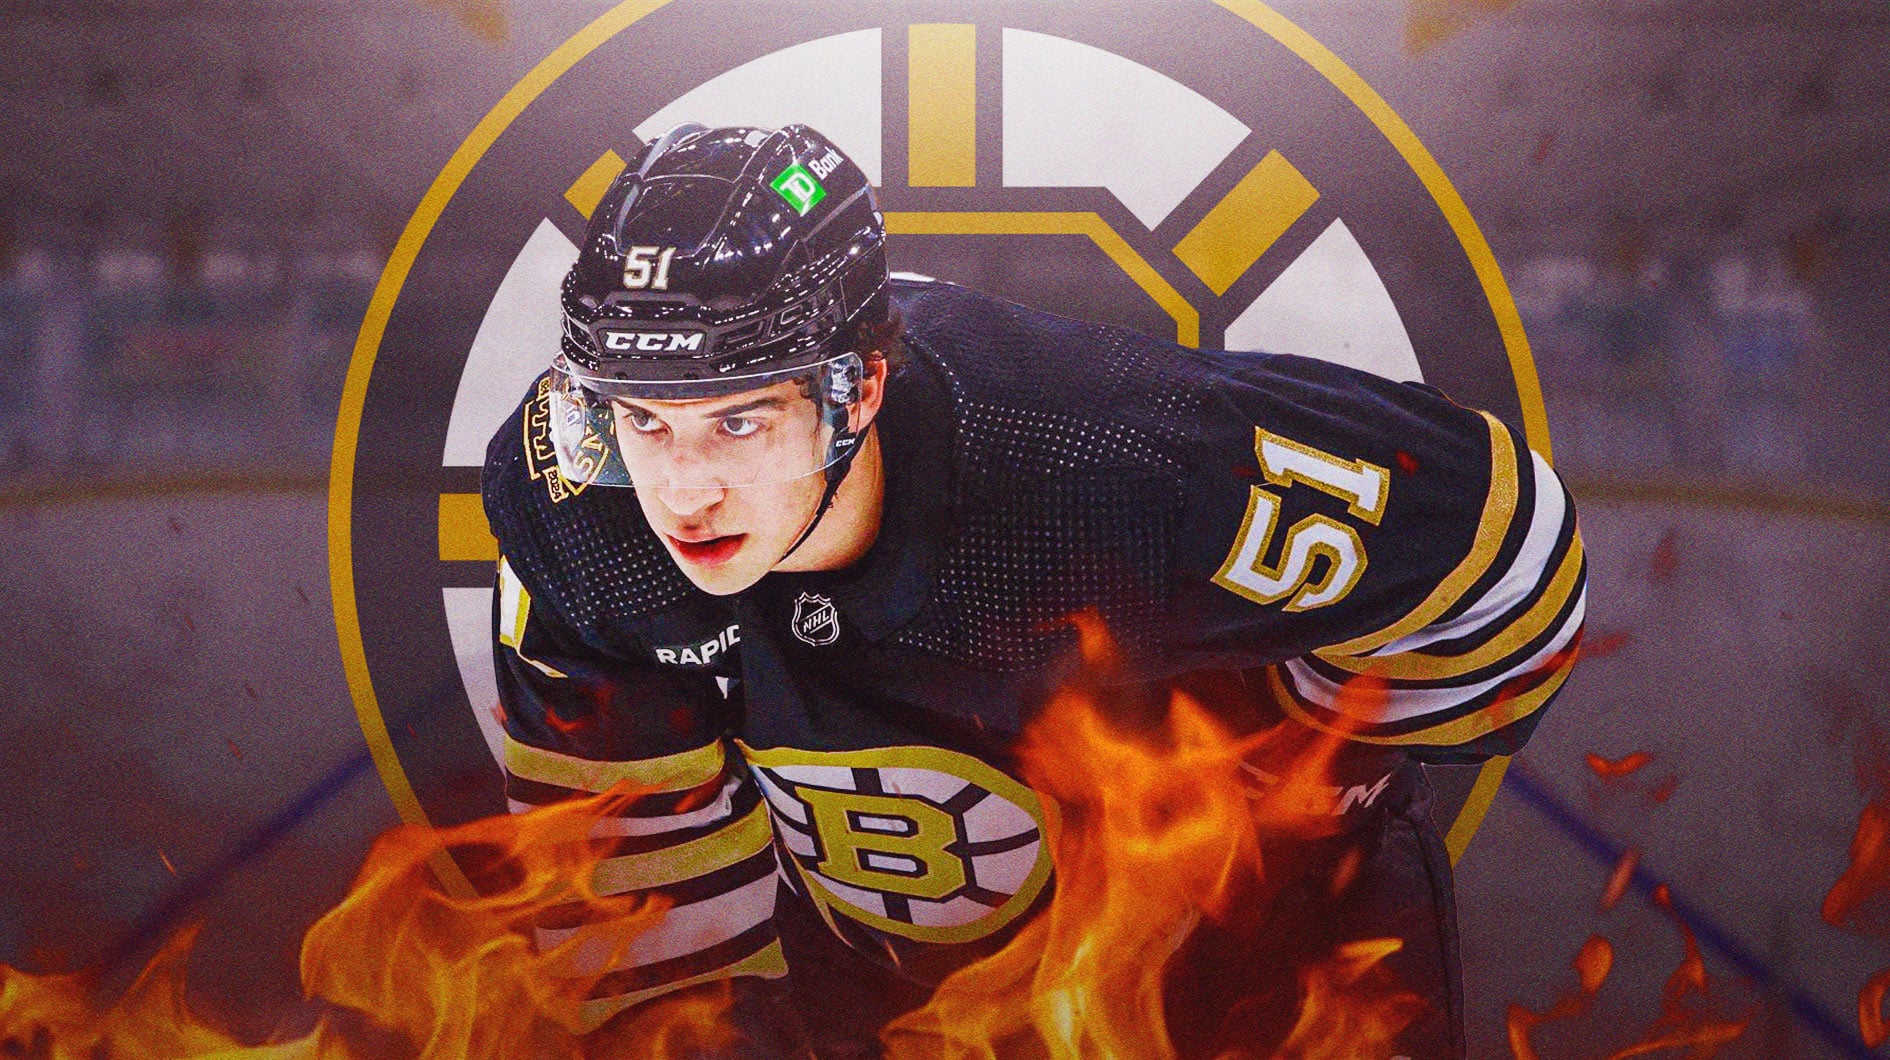 Matthew Poitras with flames coming off of him Boston Bruins